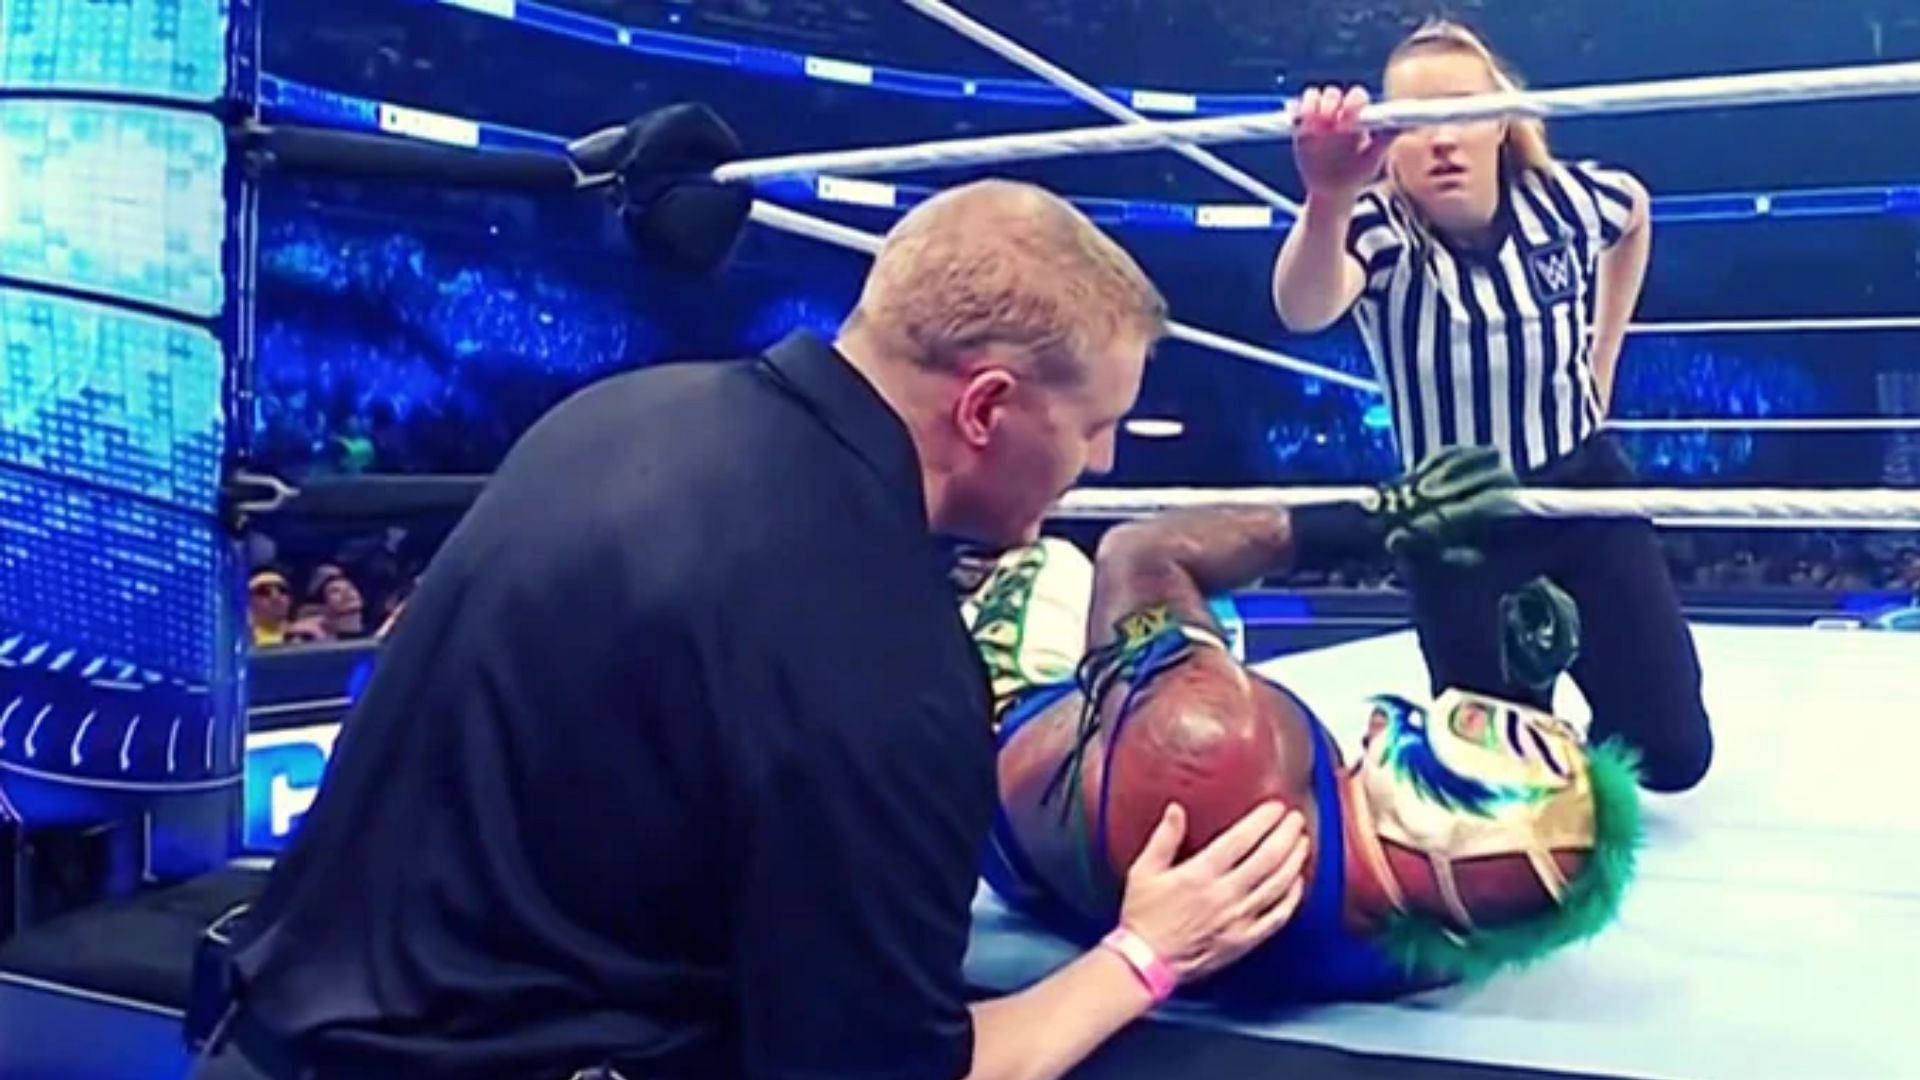 Rey Mysterio was involved in a dangerous moment during SmackDown